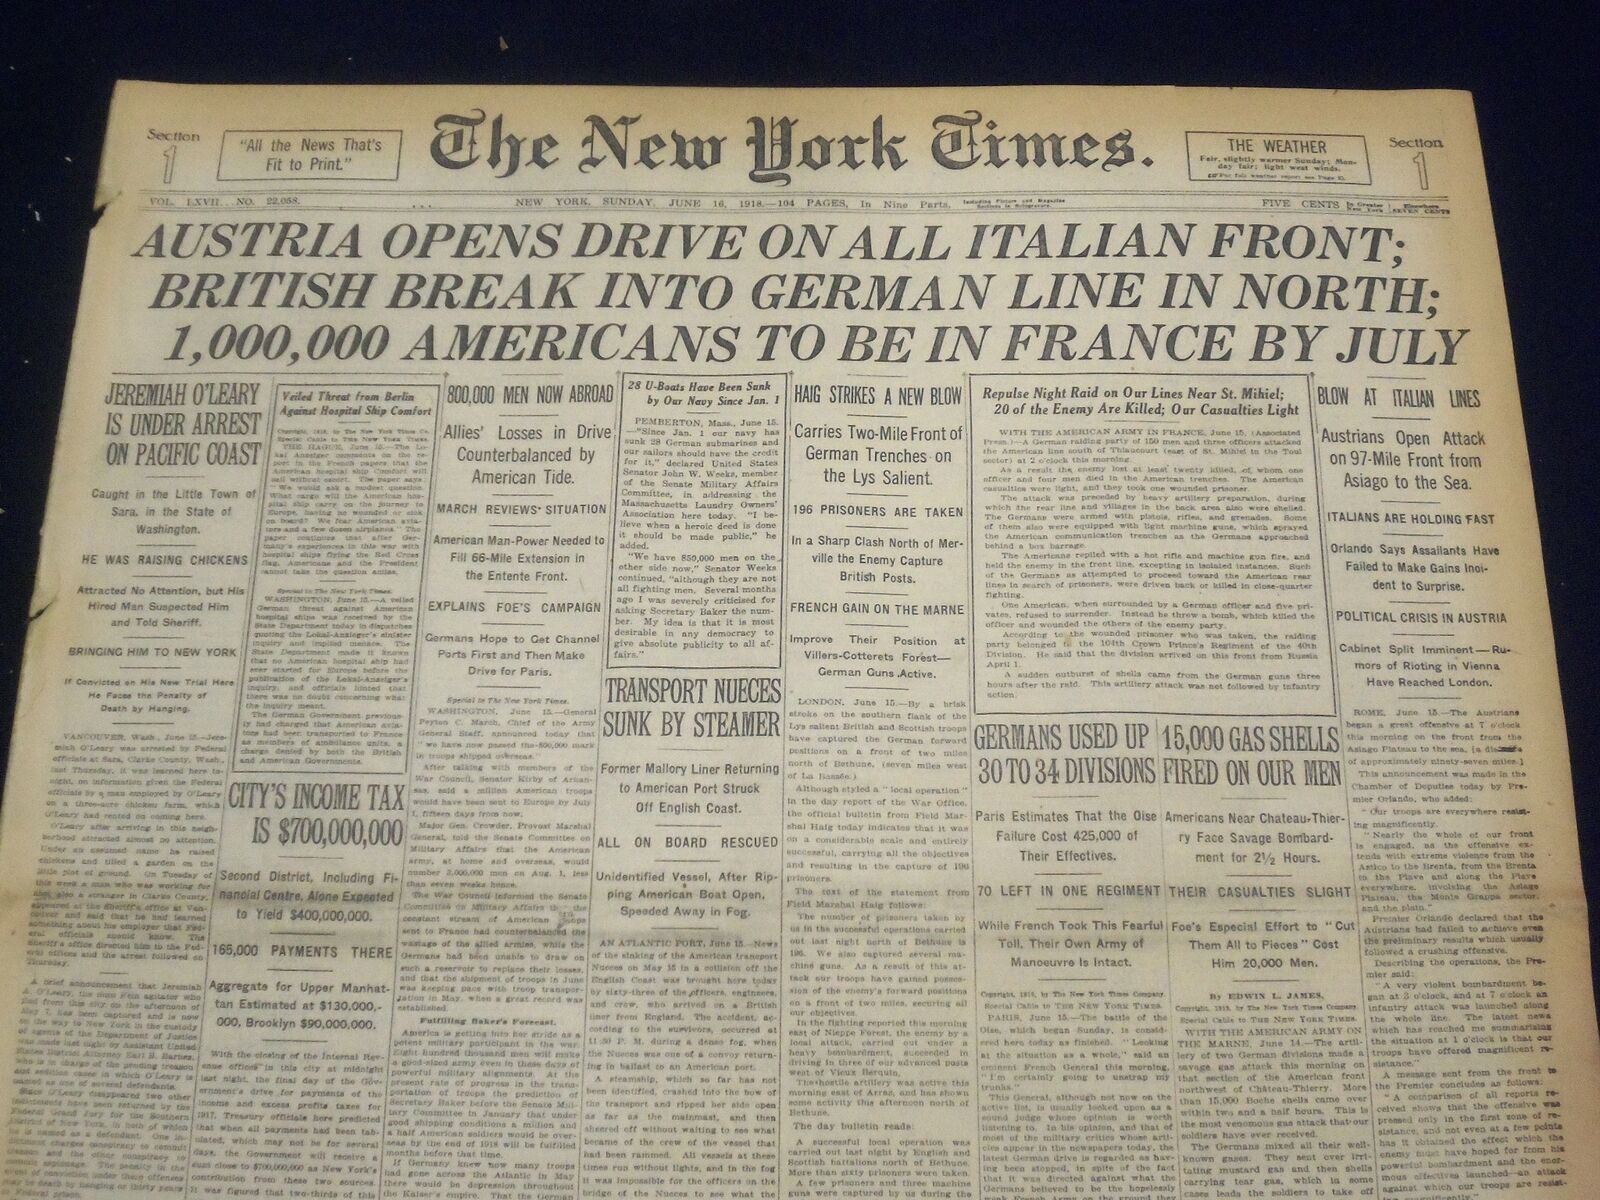 1918 JUNE 16 NEW YORK TIMES-1,000,000 AMERICANS TO BE IN FRANCE BY JULY- NT 9088